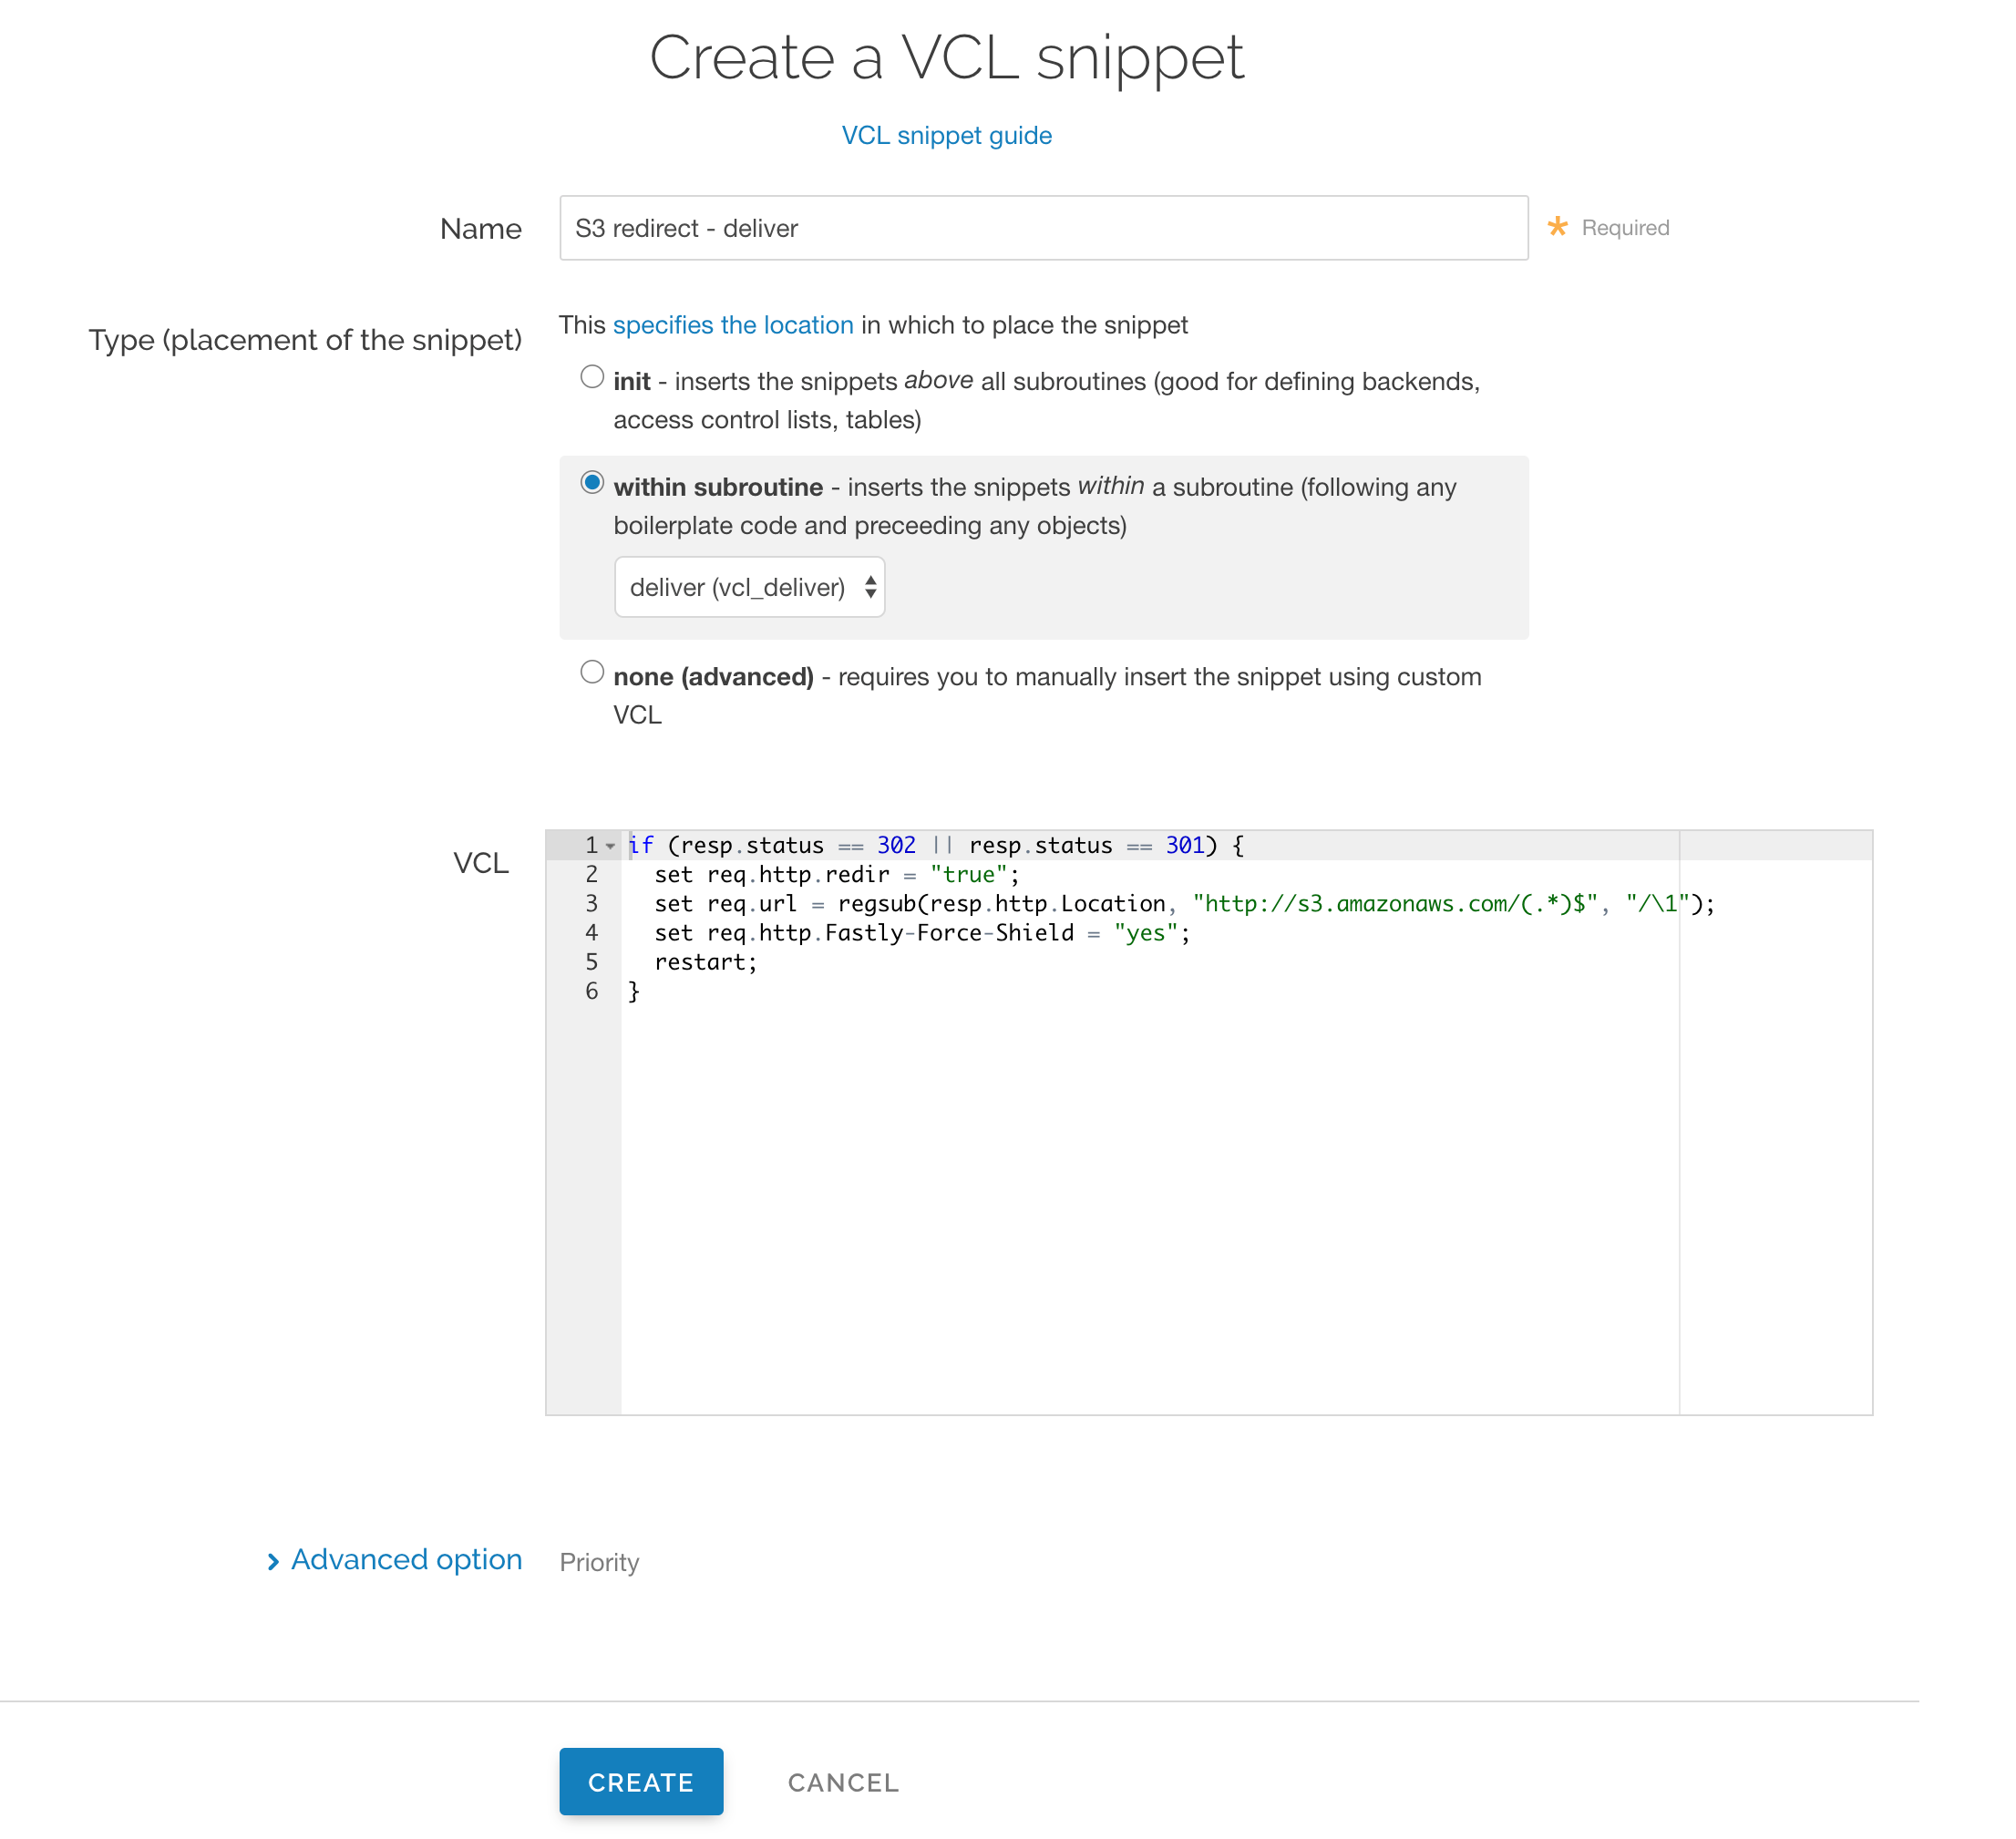 Redirect to S3 redirect via a deliver VCL Snippet